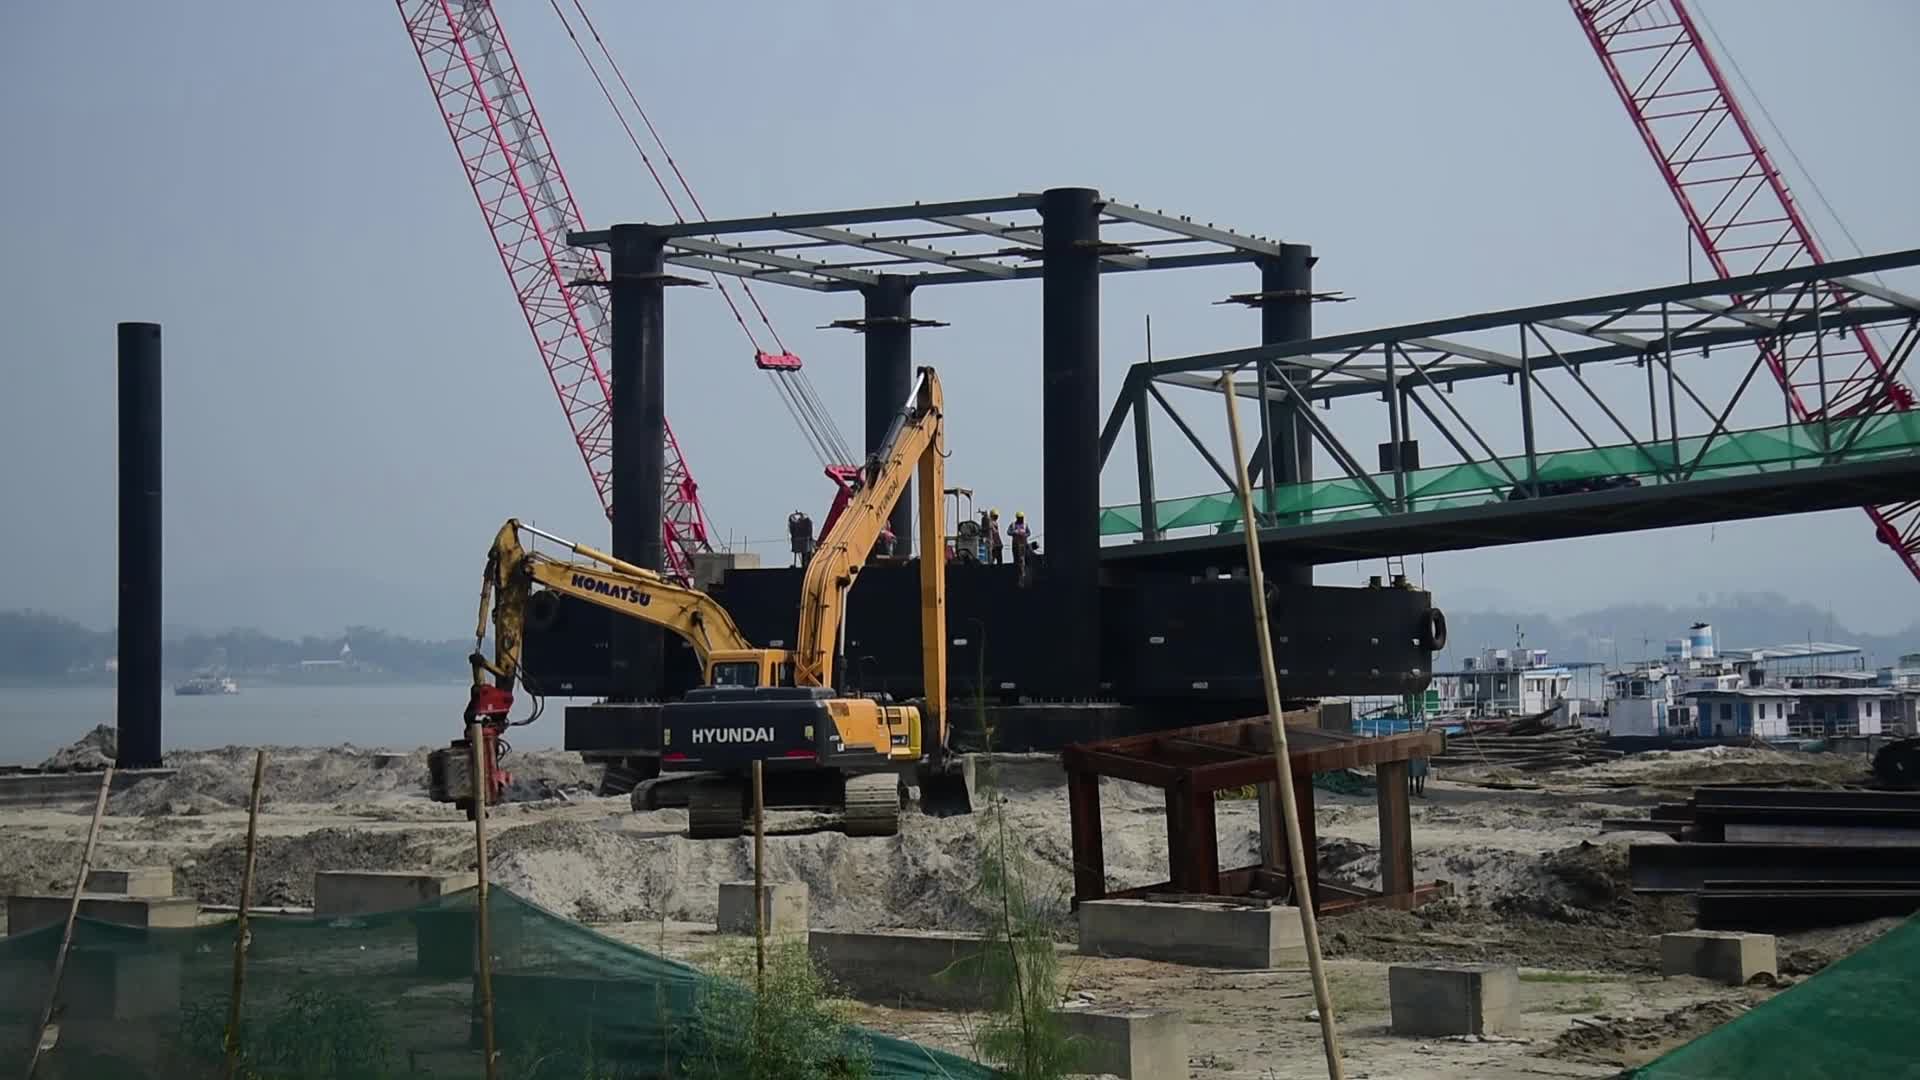 Construction works on India’s First River Terminal Guwahati Gateway Ghat